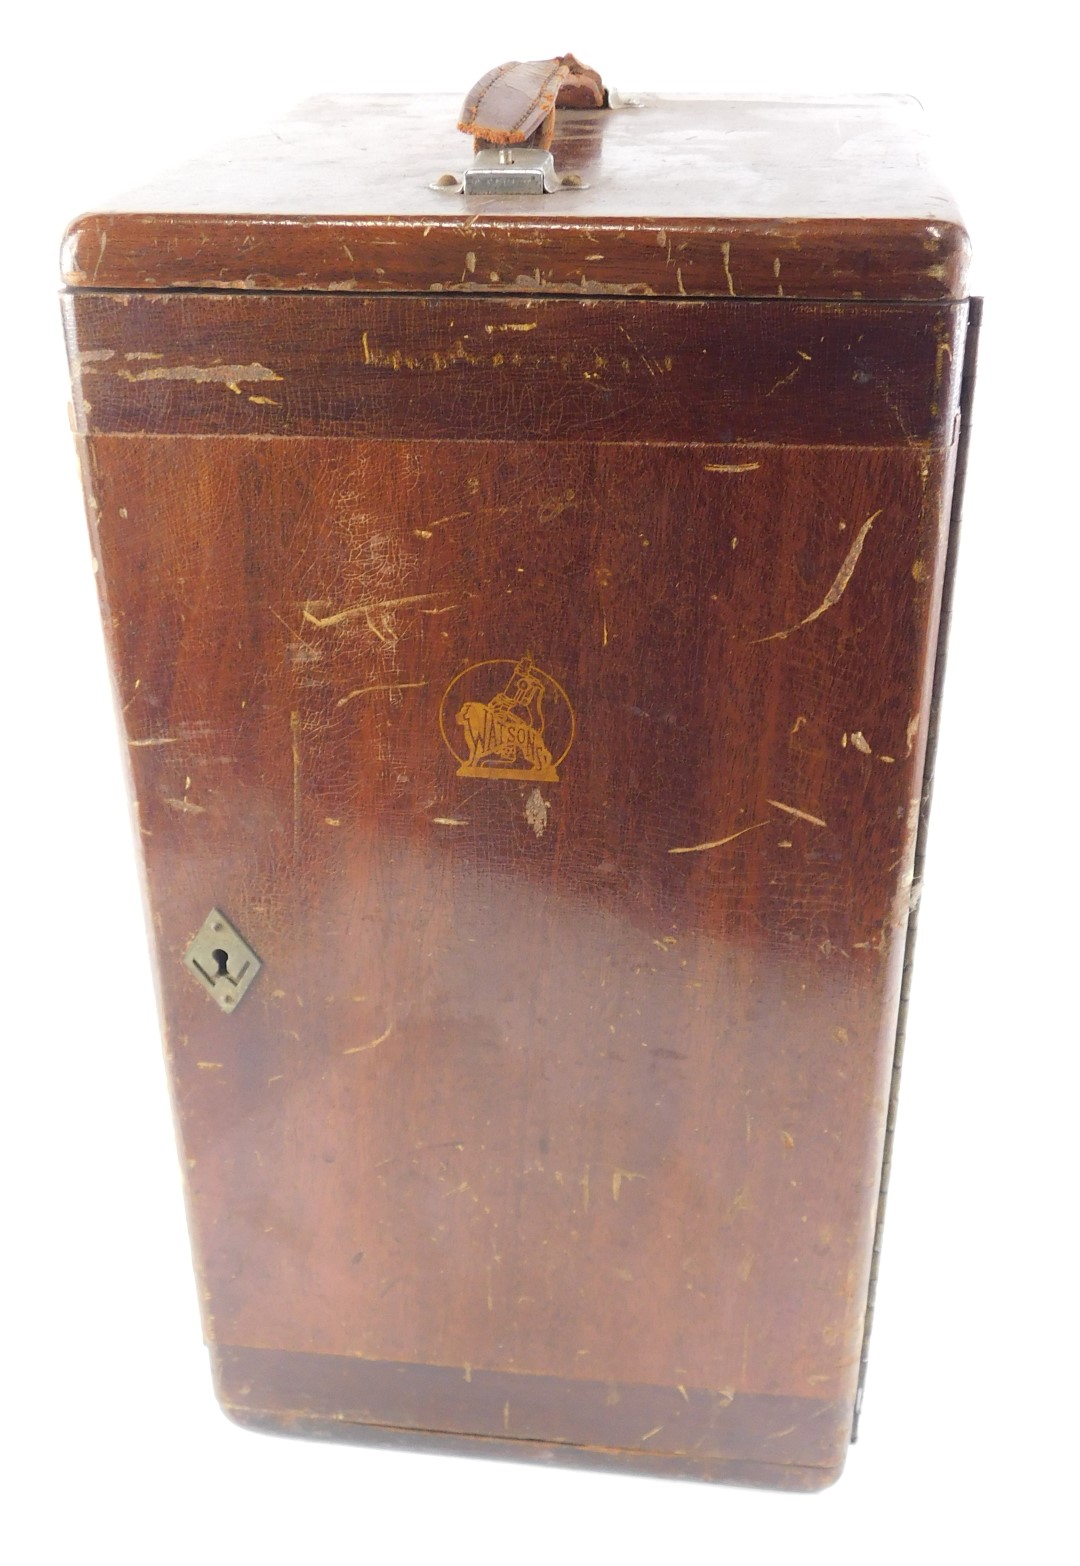 A Watson's binocular microscope, lacking some fittings, in mahogany case, the case 46cm high. - Image 7 of 7